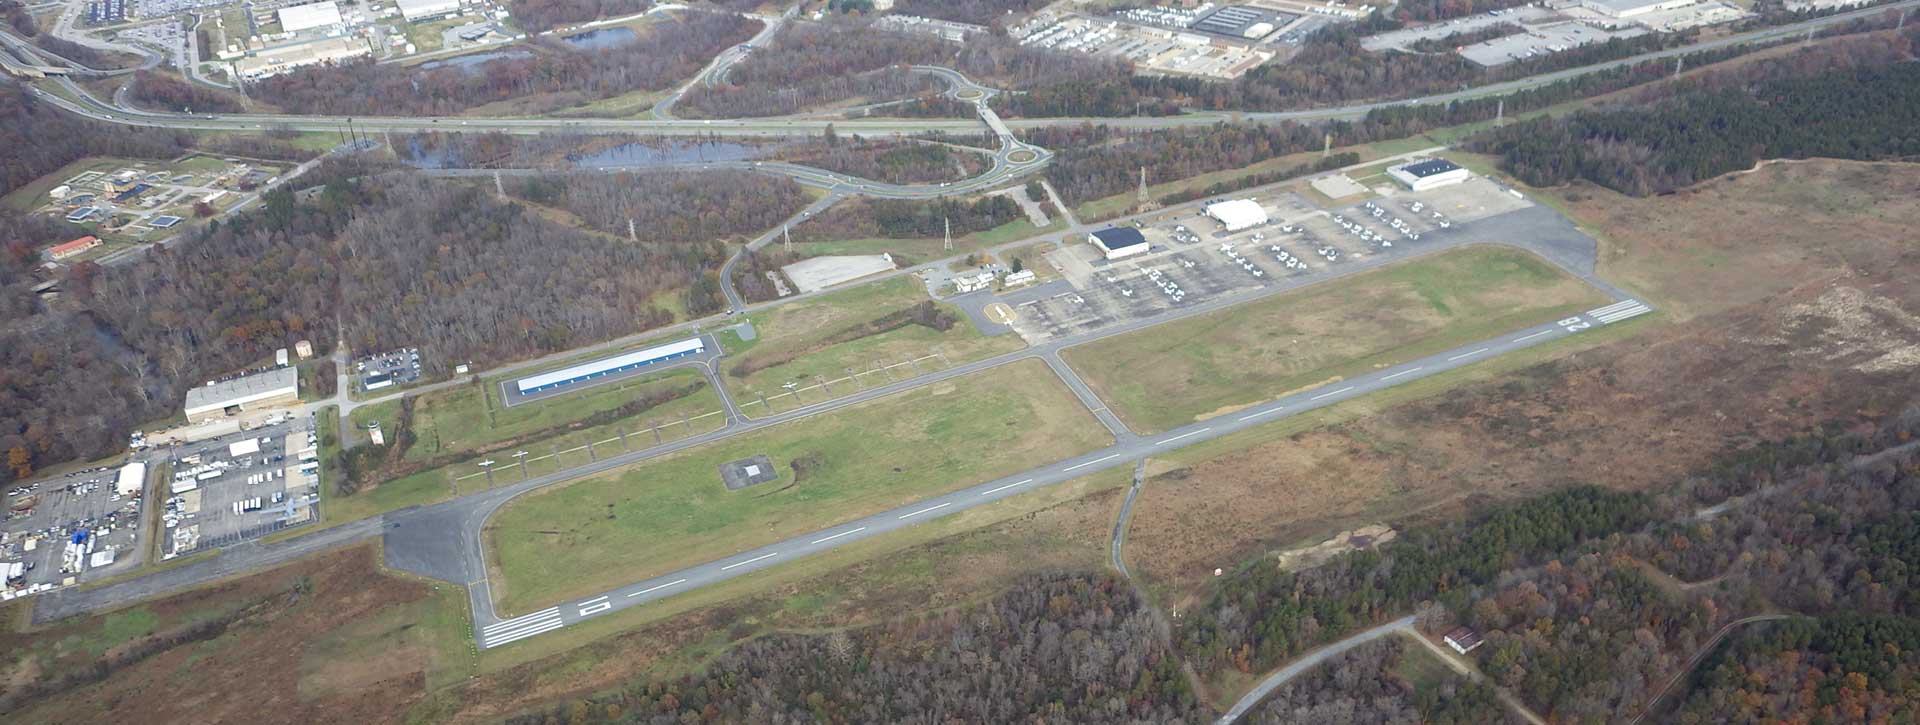 aerial view of Tipton Airport